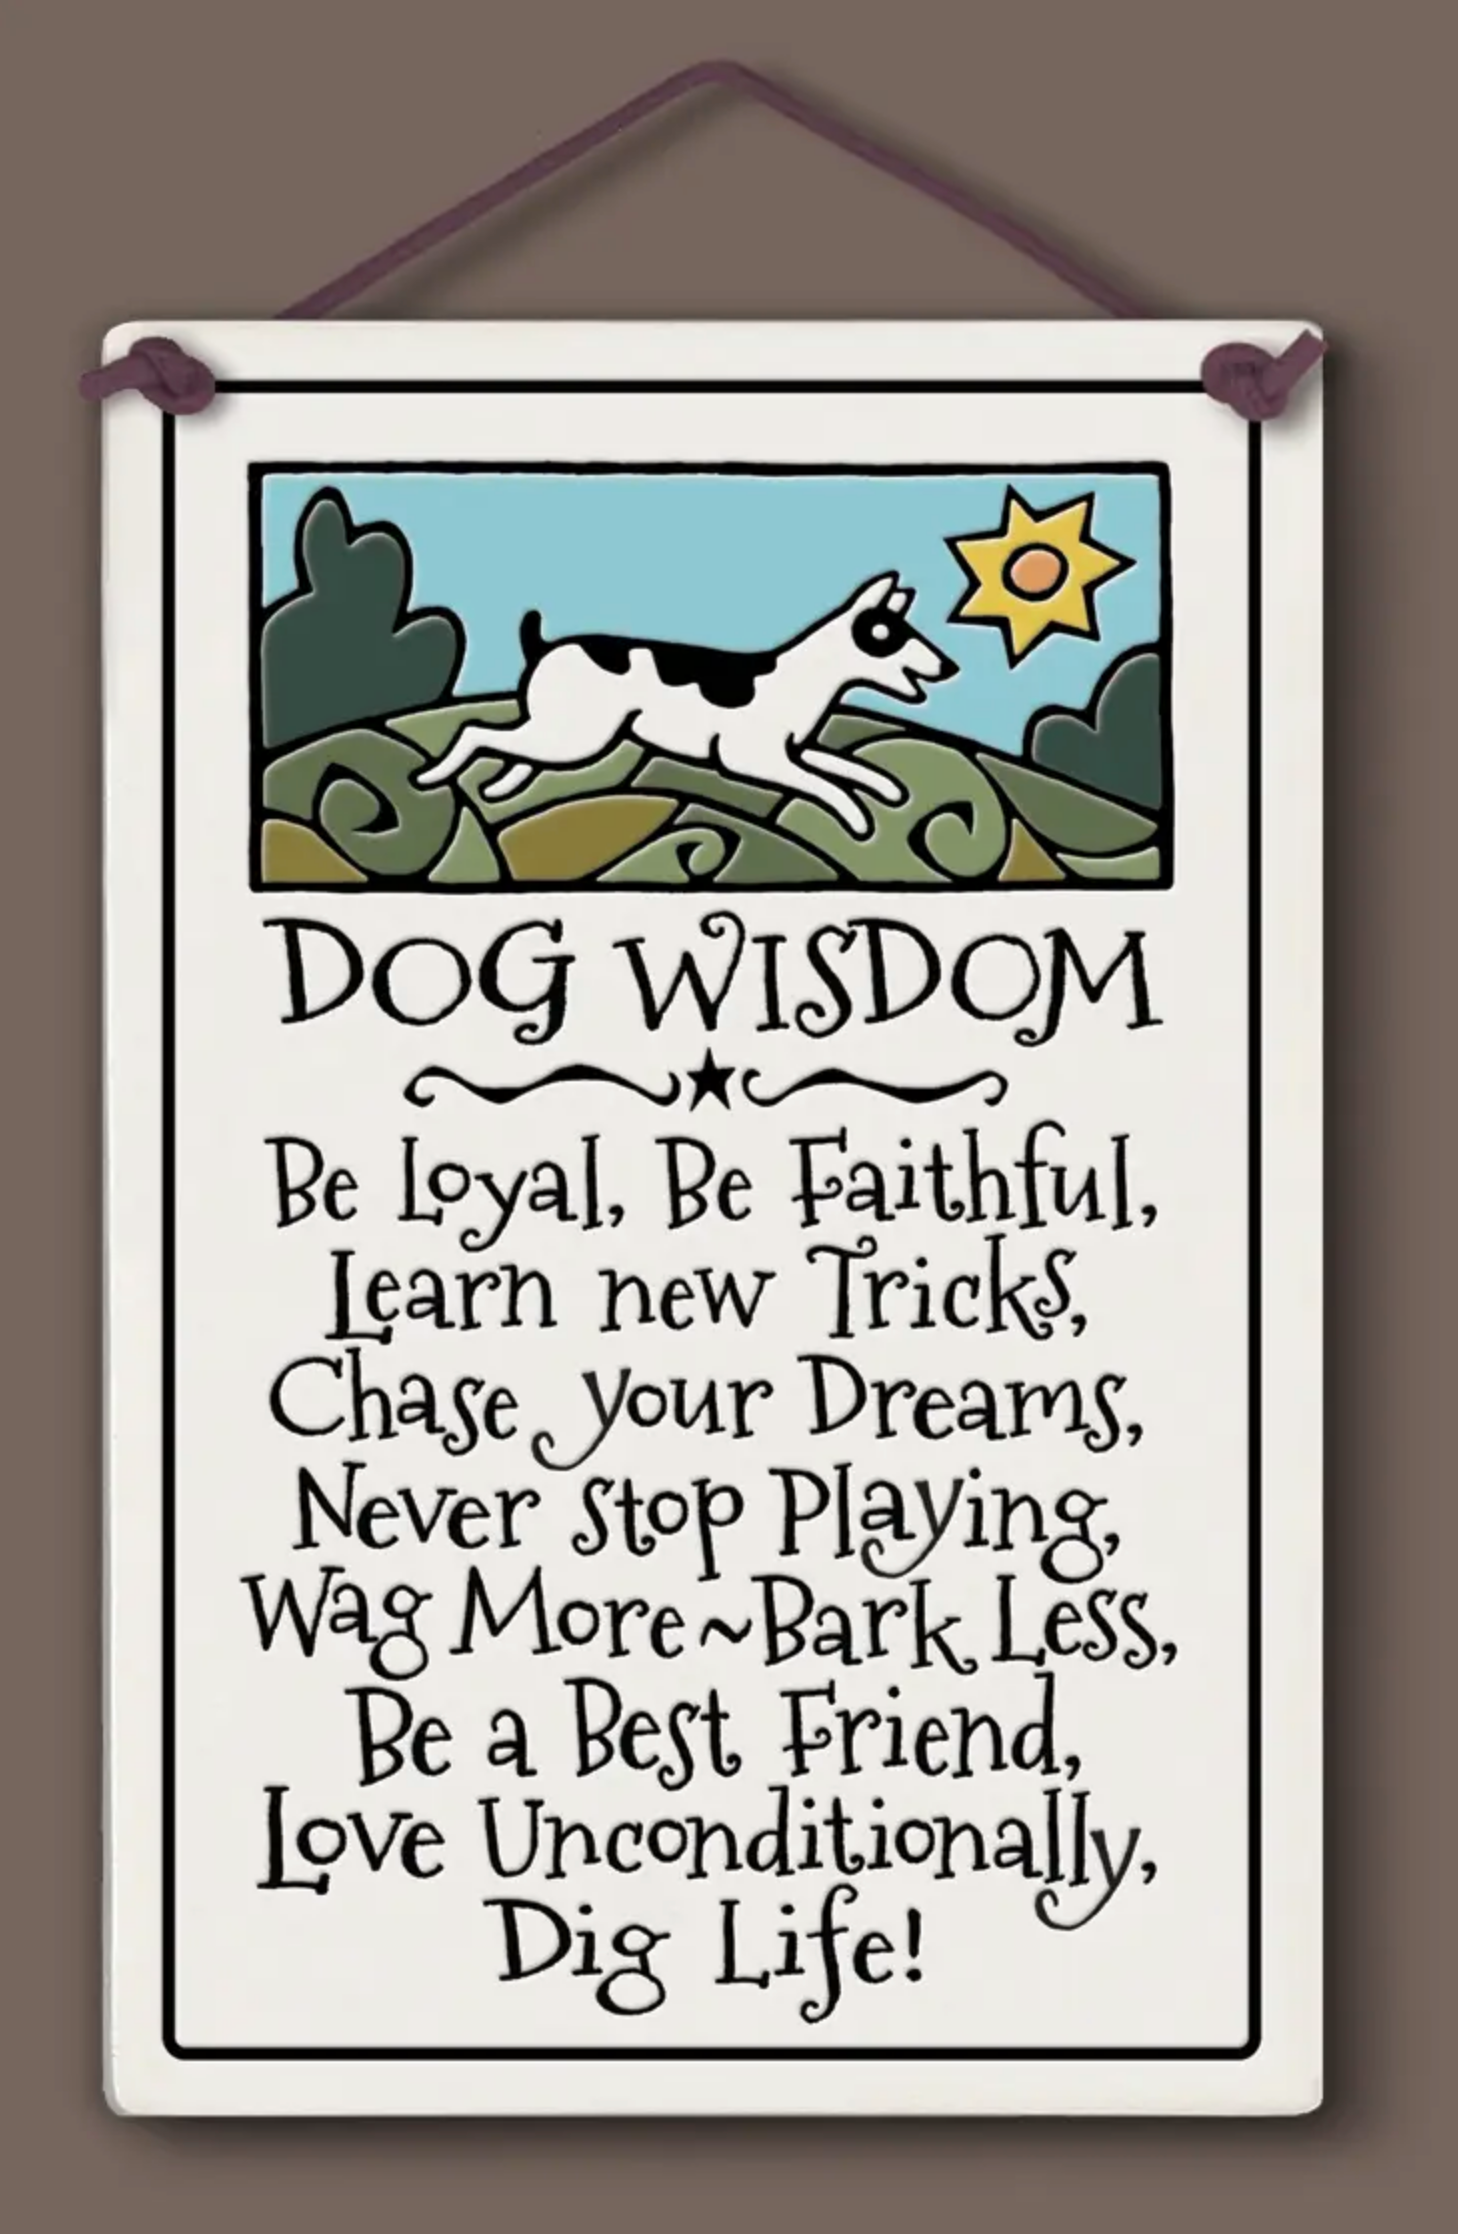 Dog Wisdom Wall Plaque - Heart of the Home PA